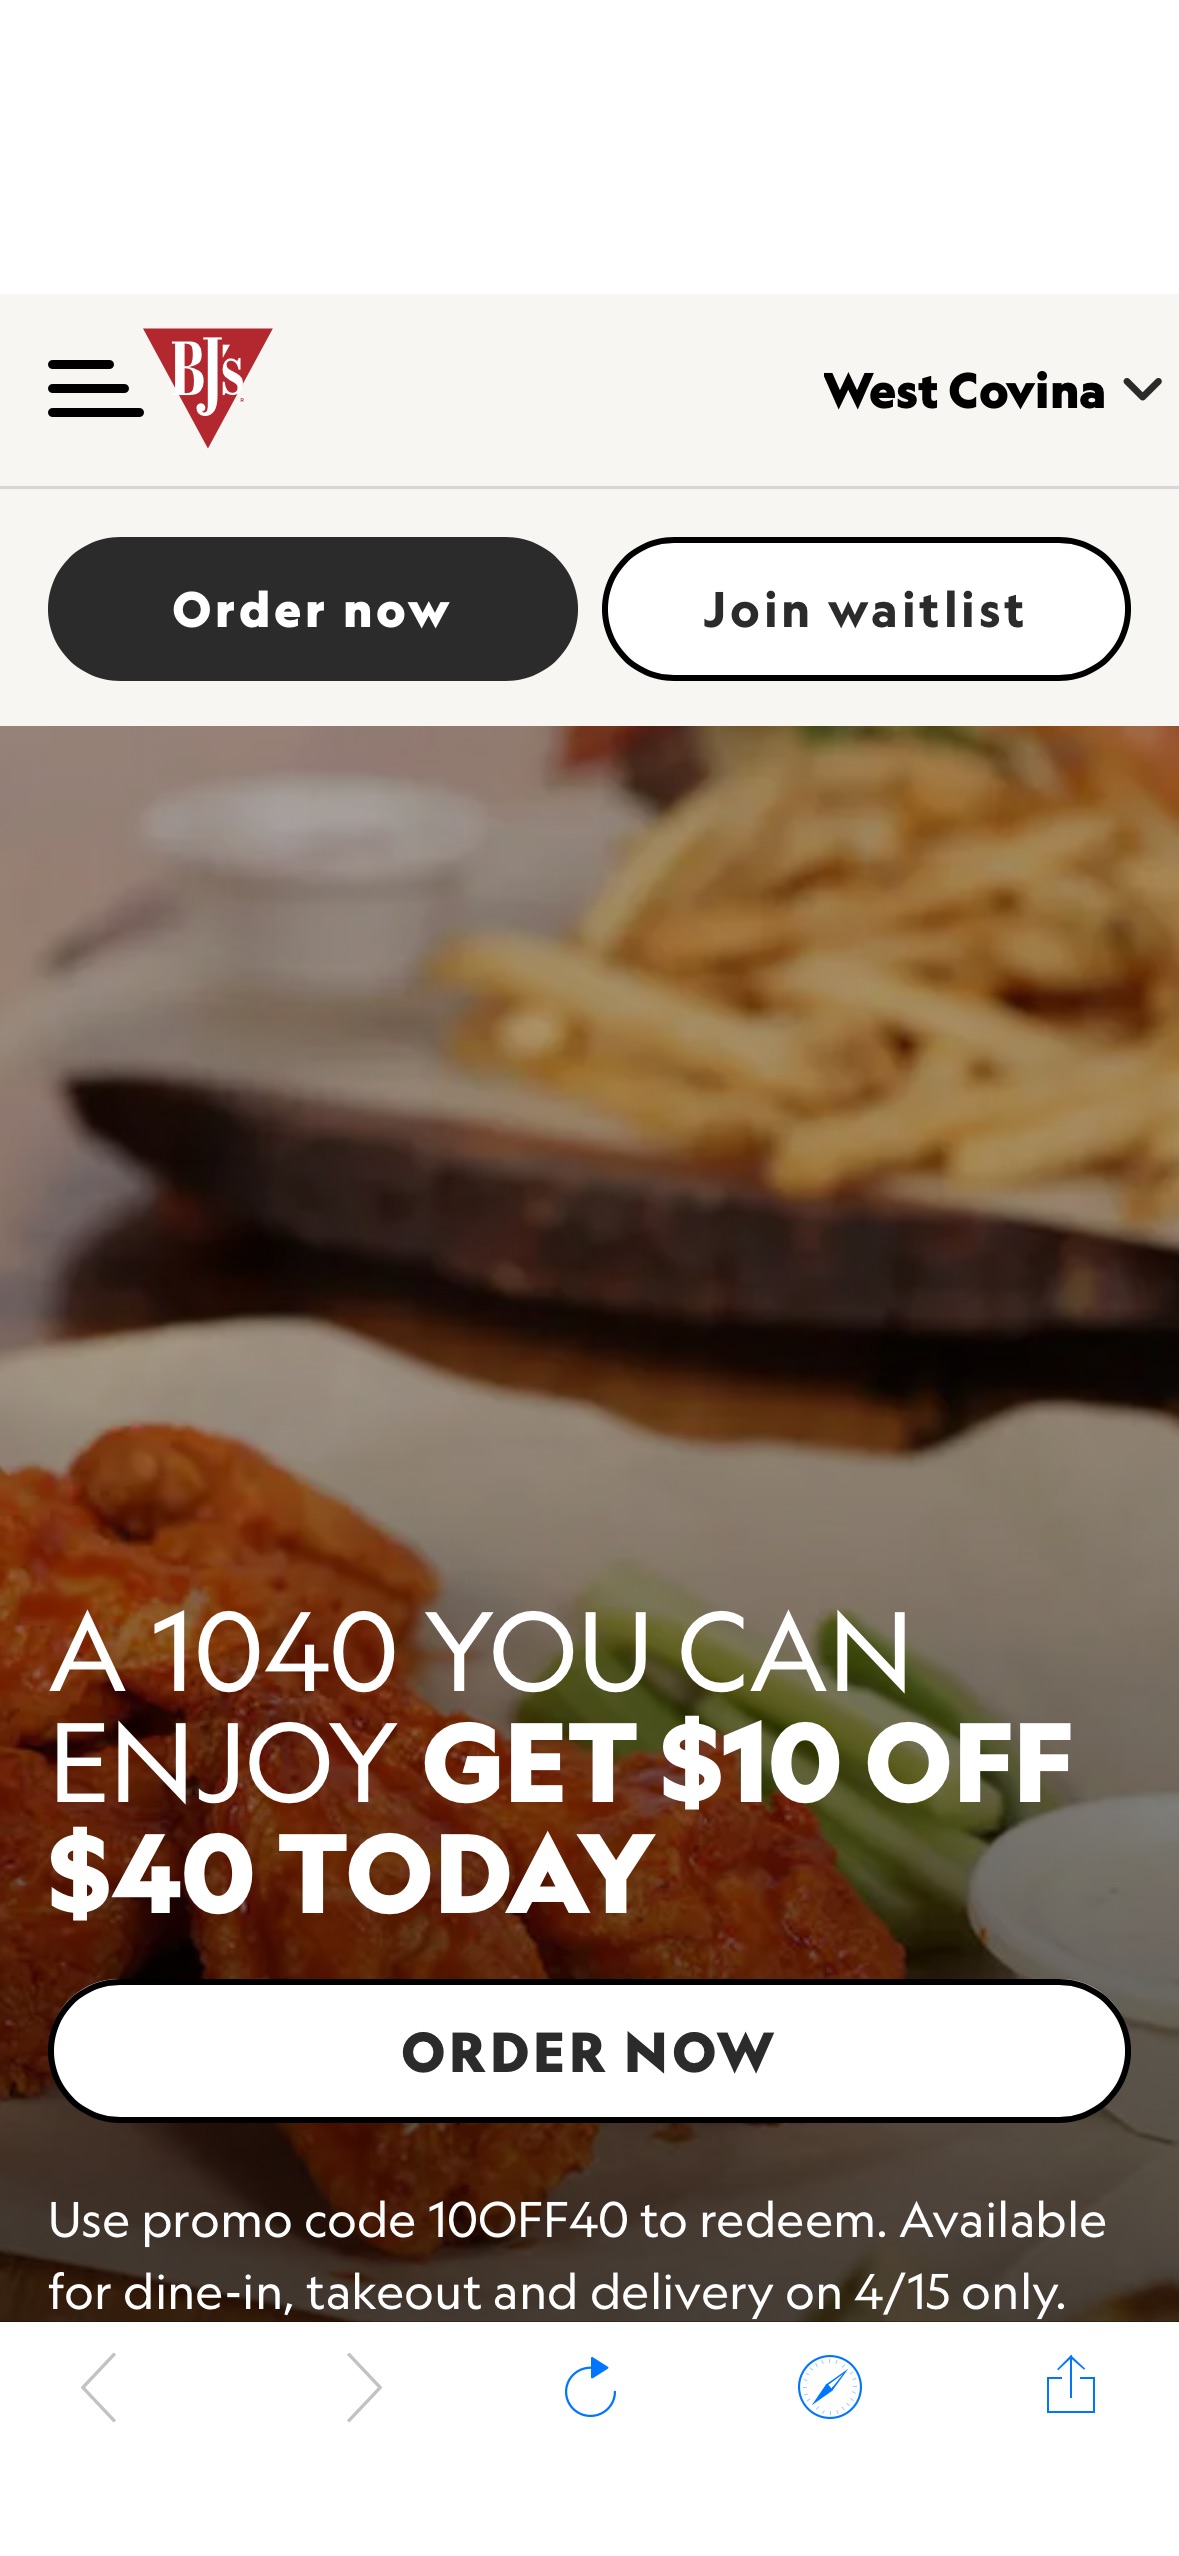 BJ’s Restaurants – On Apr. 15, BJ’s Restaurants gives $10 off $40 orders (promo code: 10OFF40) for take-out or delivery. Enjoy their signature dishes like Deep Dish Pizzas, Hand-Crafted Burgers, Baby 